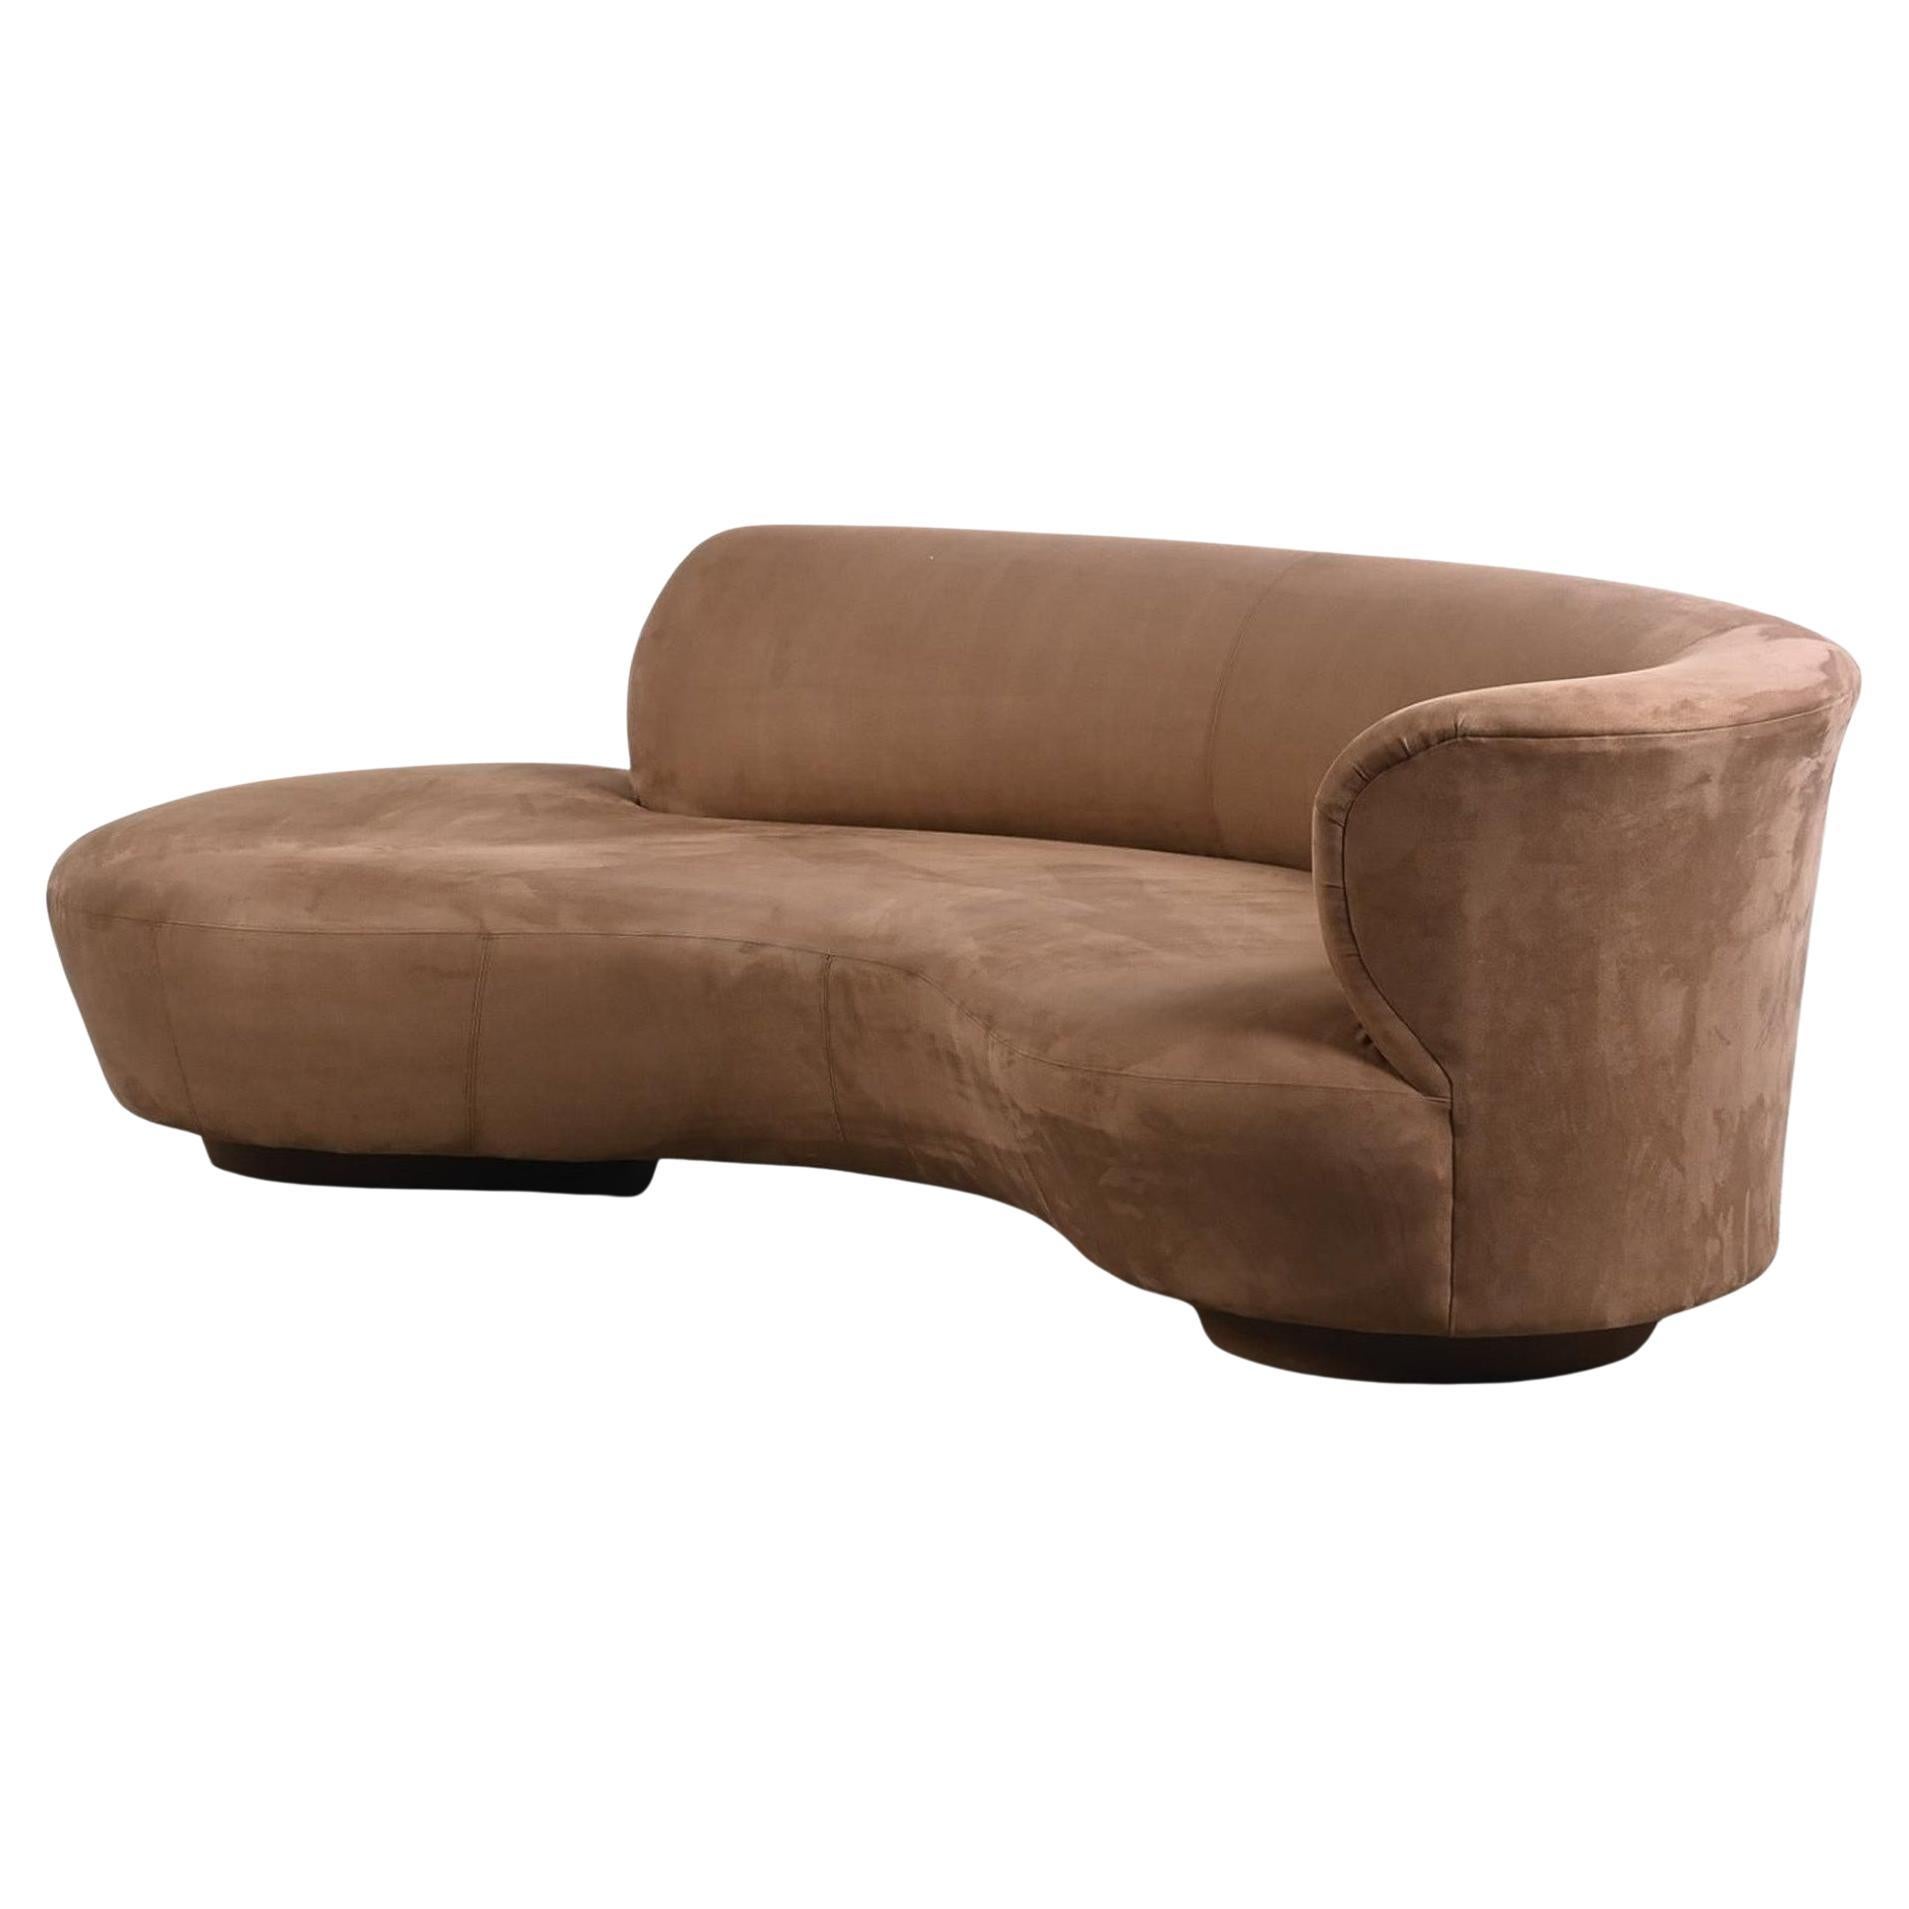 Vladimir Kagan Curved Free Form Styled Sofa in Suede Upholstery, 1990s For Sale